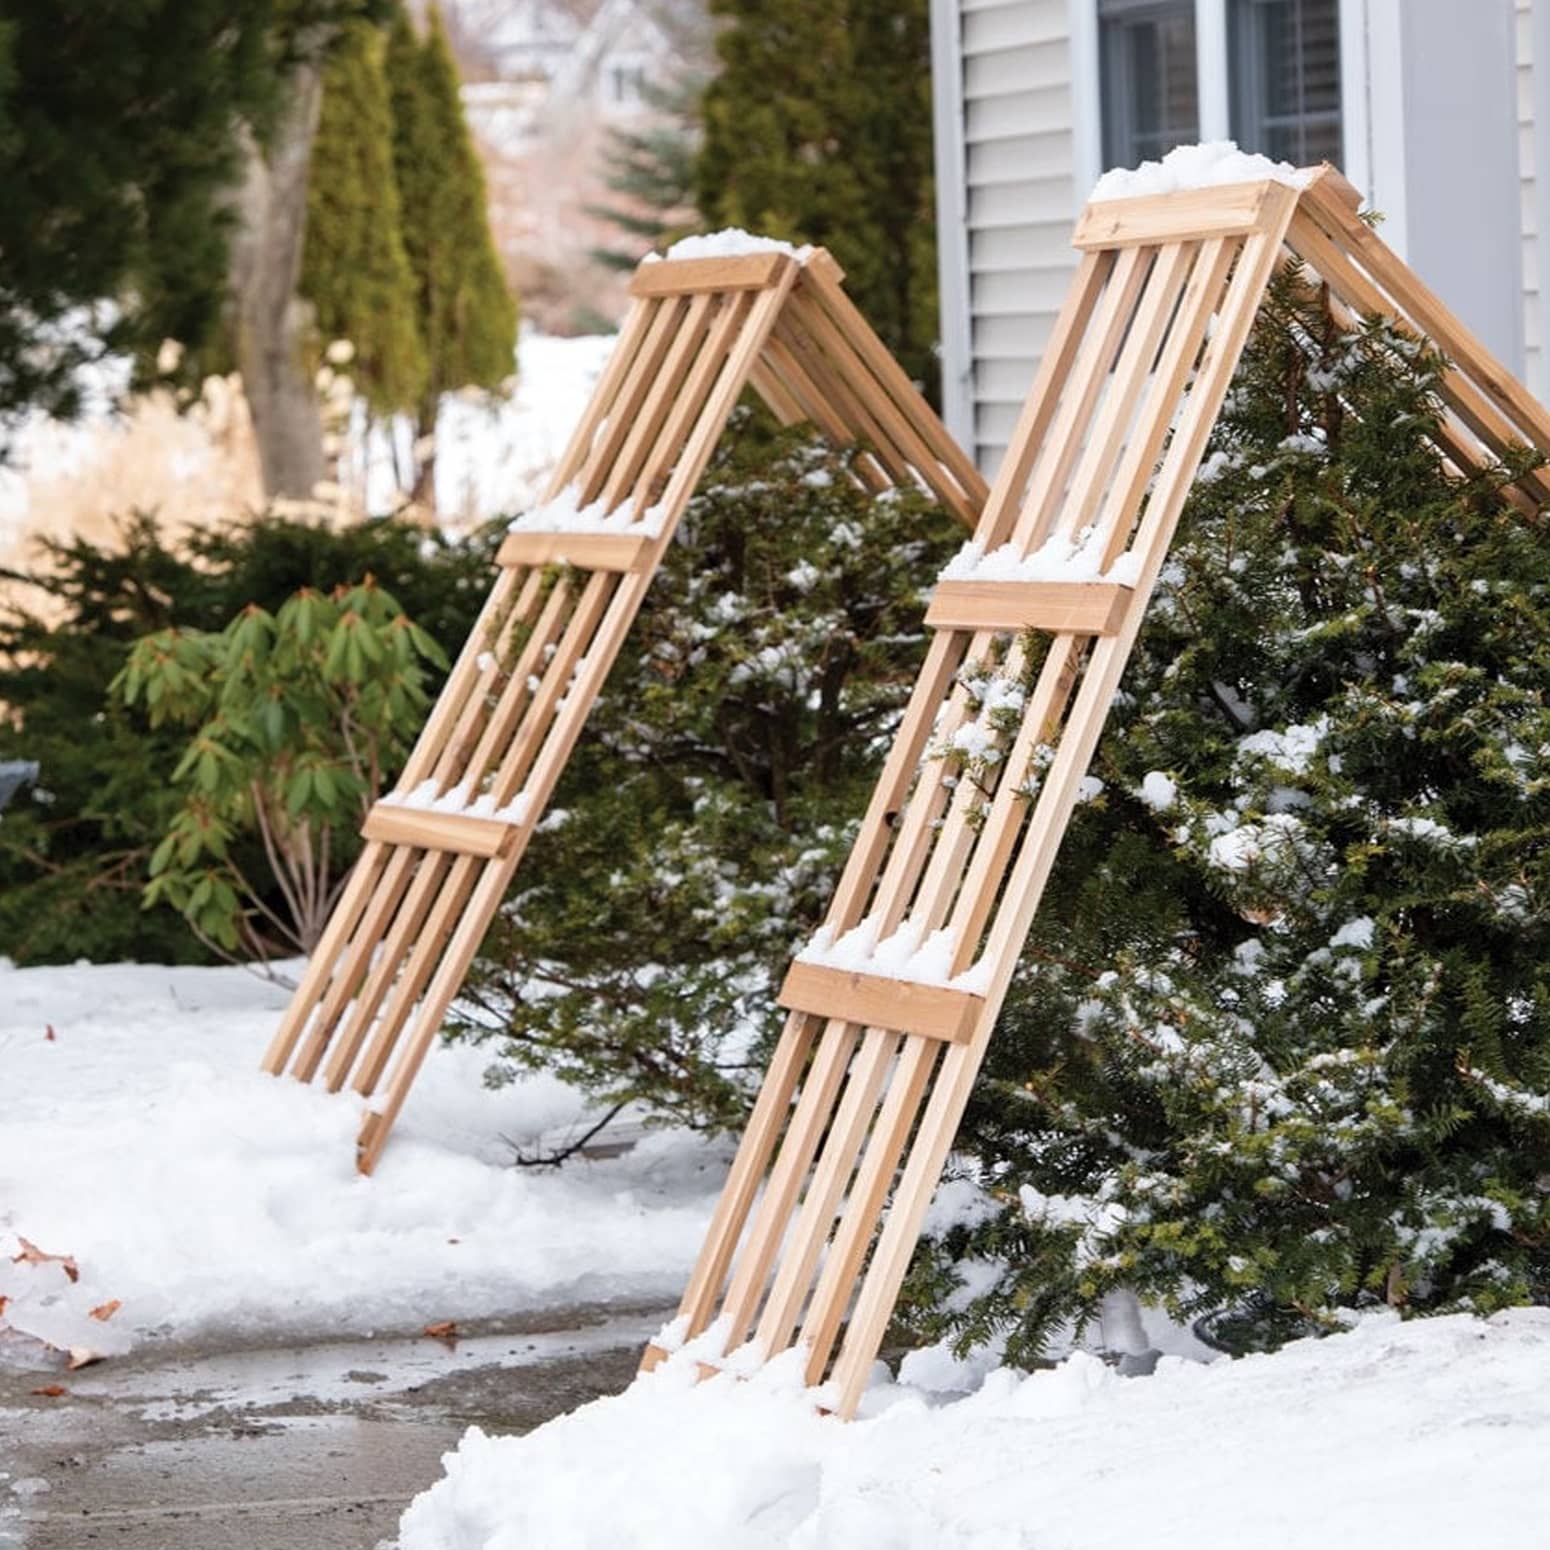 Cedar Shrub Guards - Protect Bushes From Falling Snow and Ice